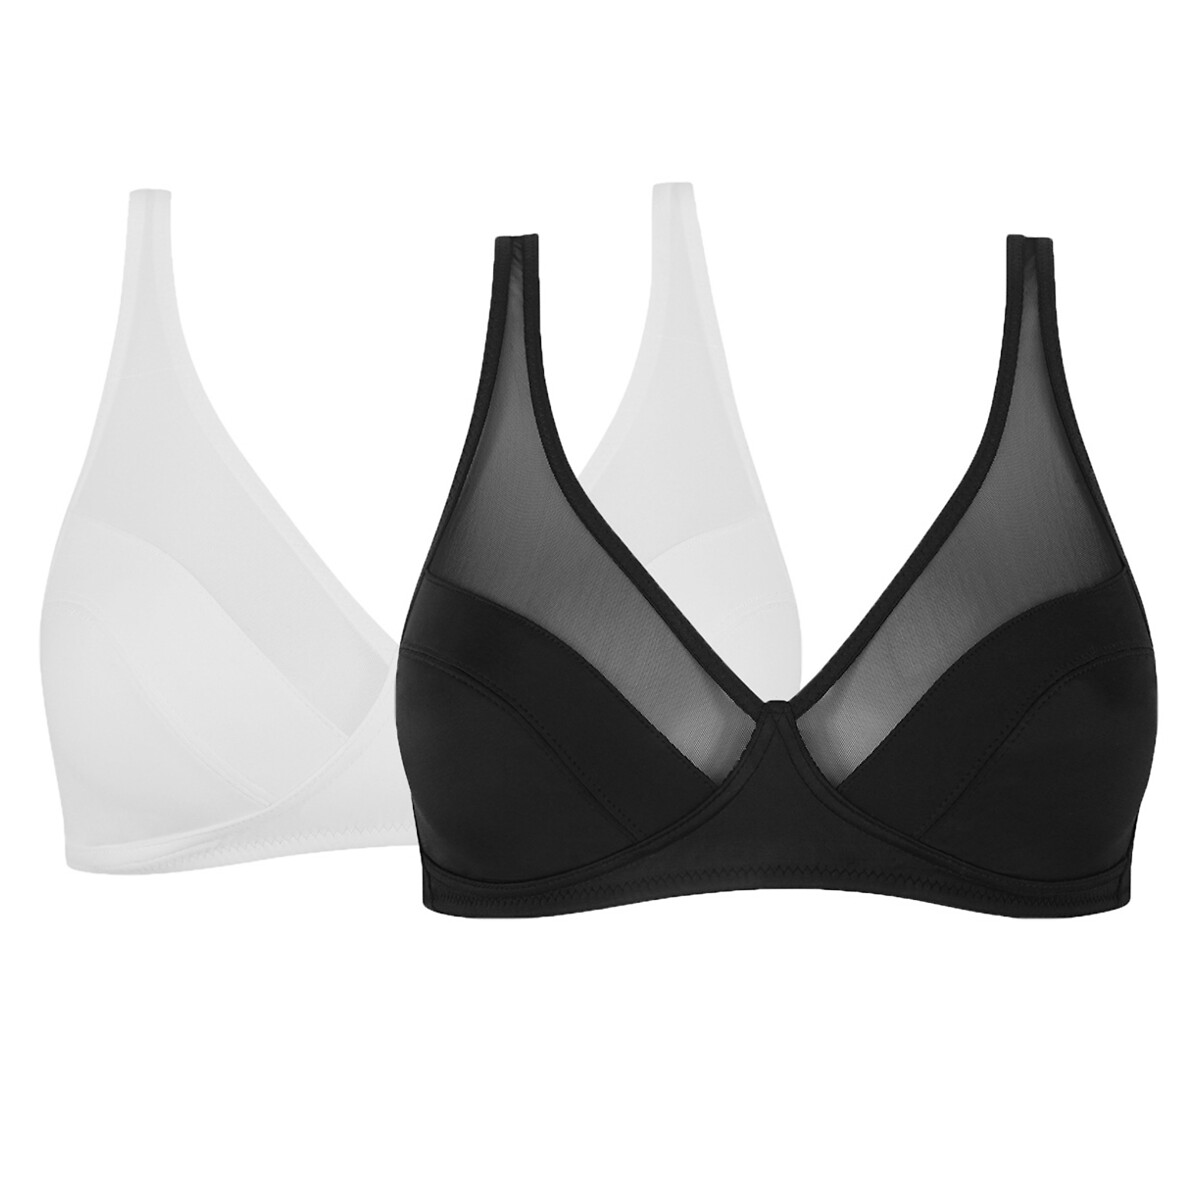 Pack of 2 Generous Bras without Underwiring